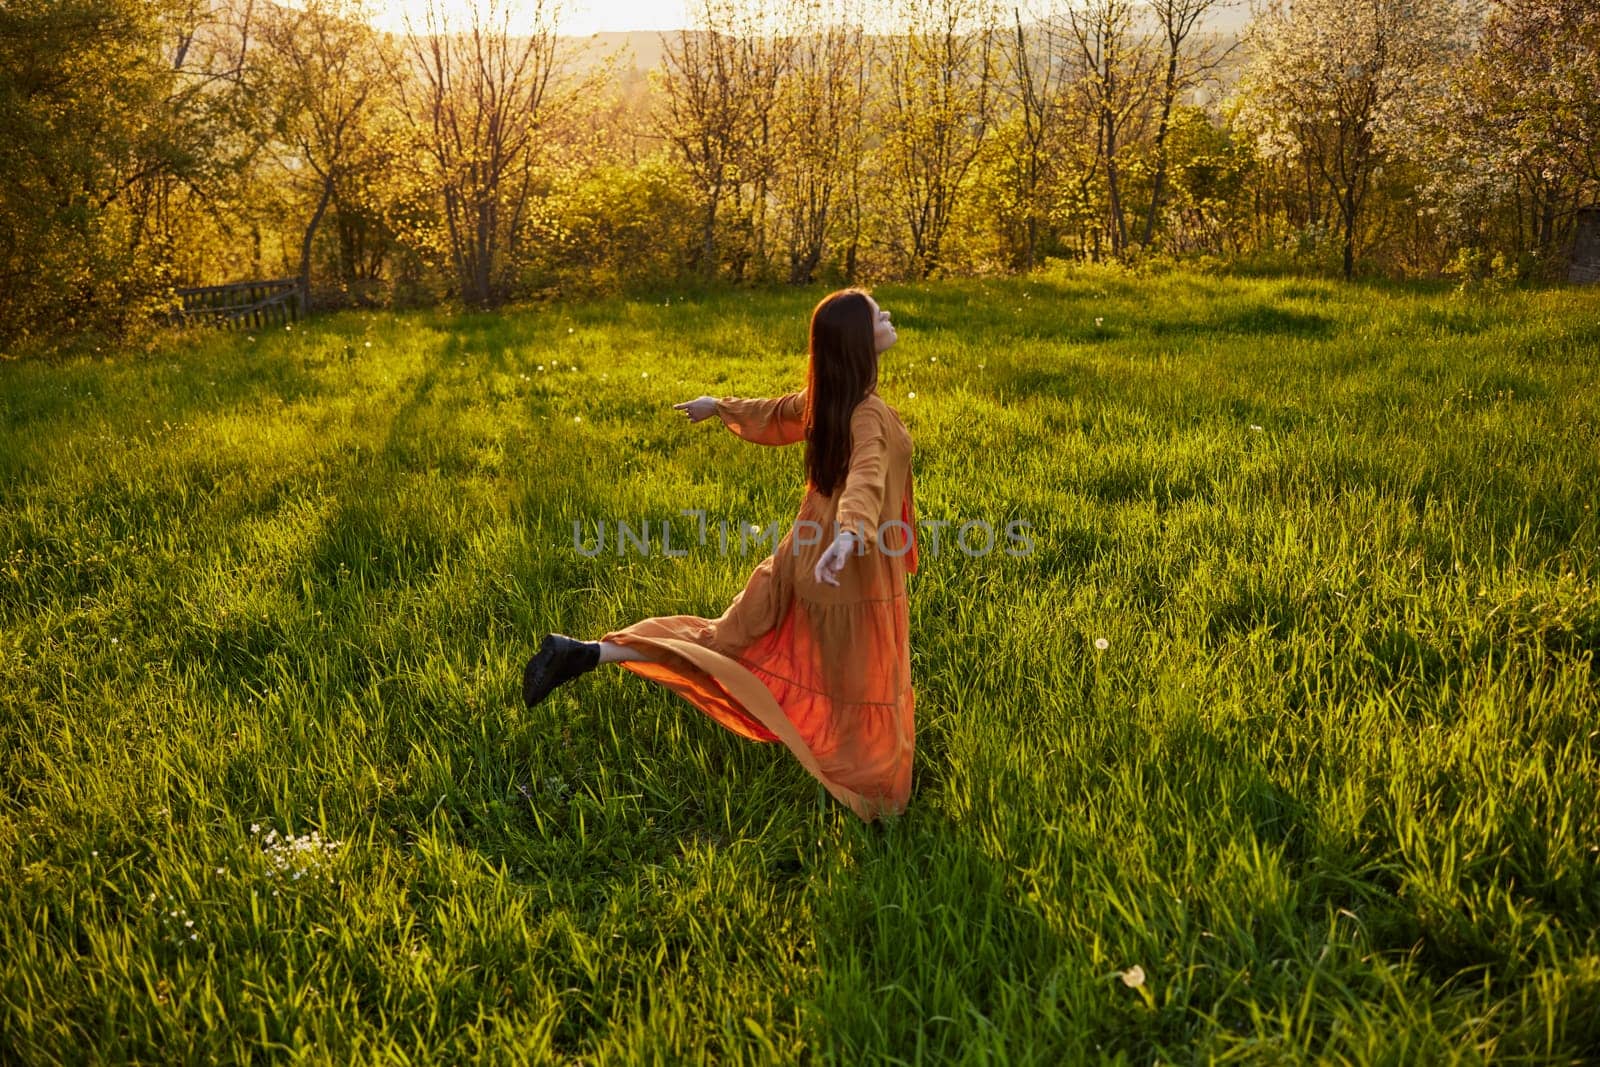 a joyful woman runs through a green field with her hands behind her back, enjoying a warm summer day and nature during the sunset. Horizontal photography in nature. High quality photo